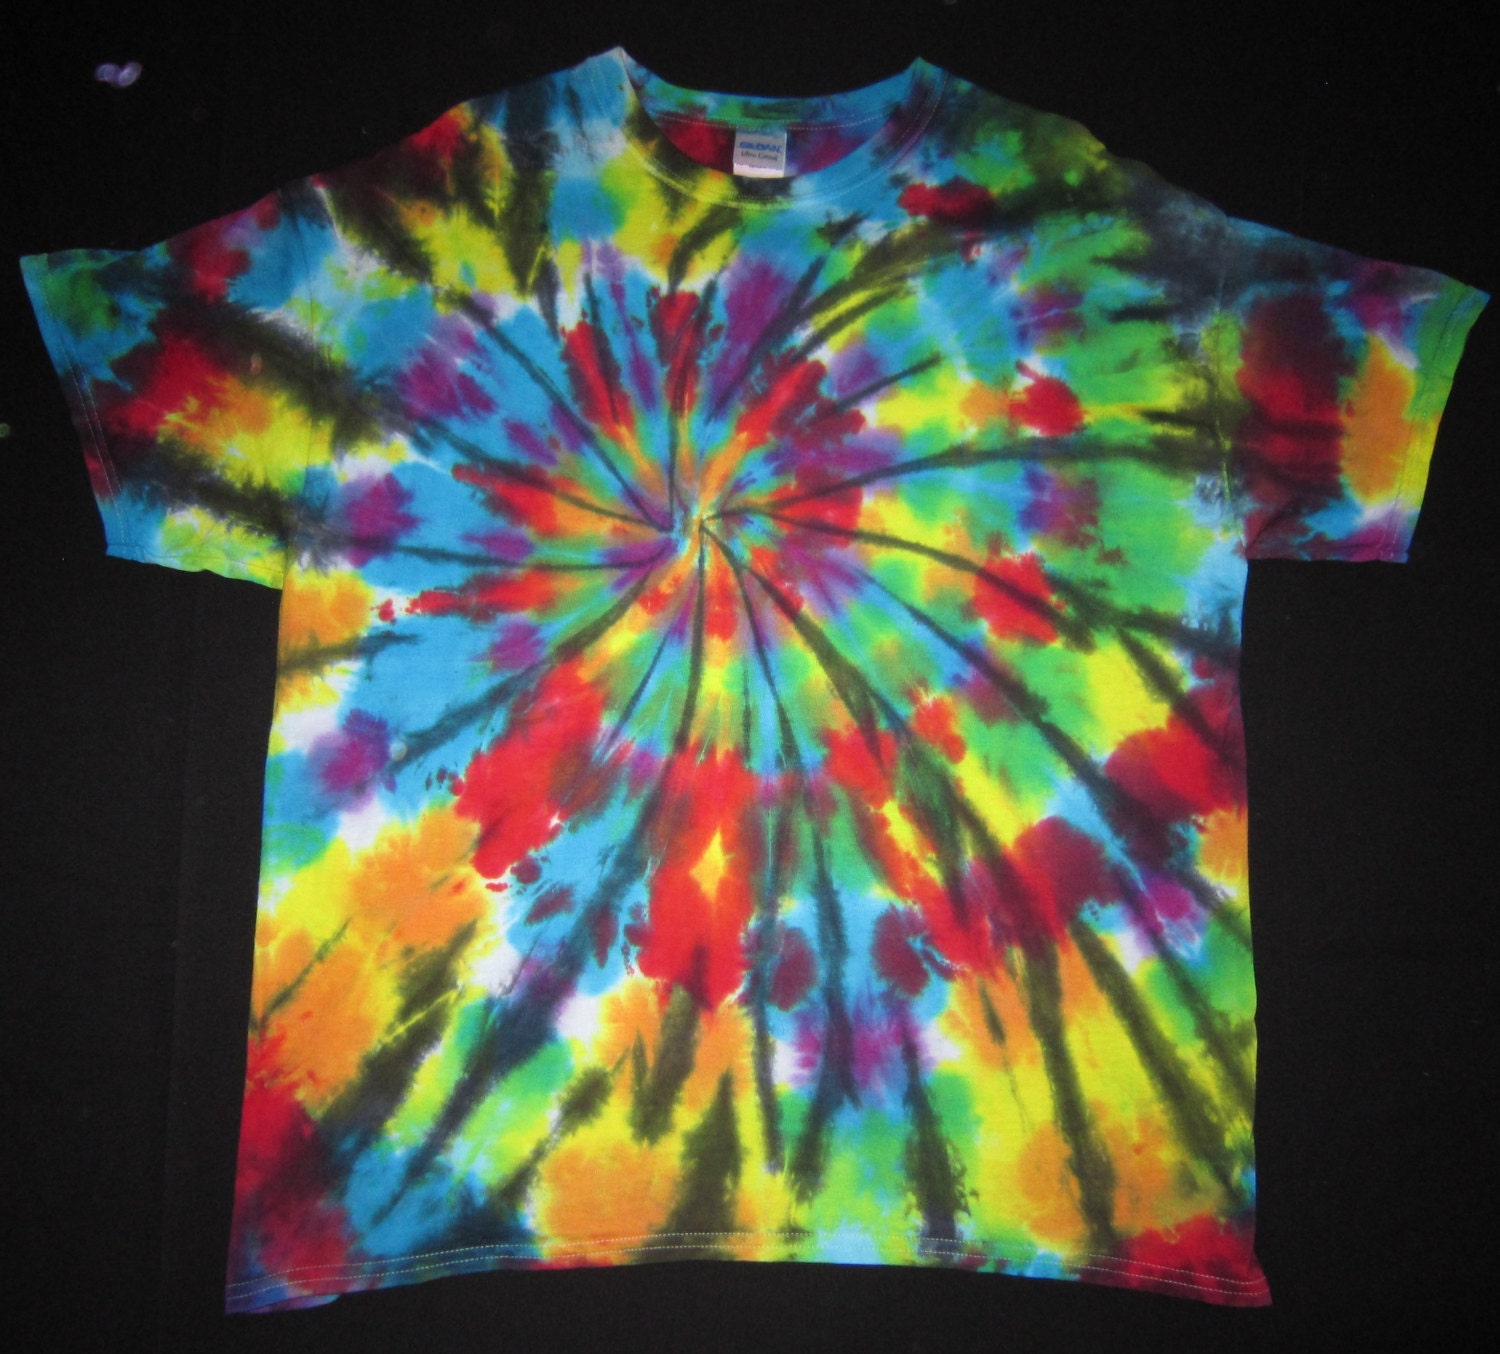 Psychedelic Sprial Tie Dye T-Shirt Fits by PsychedelicTieDyes